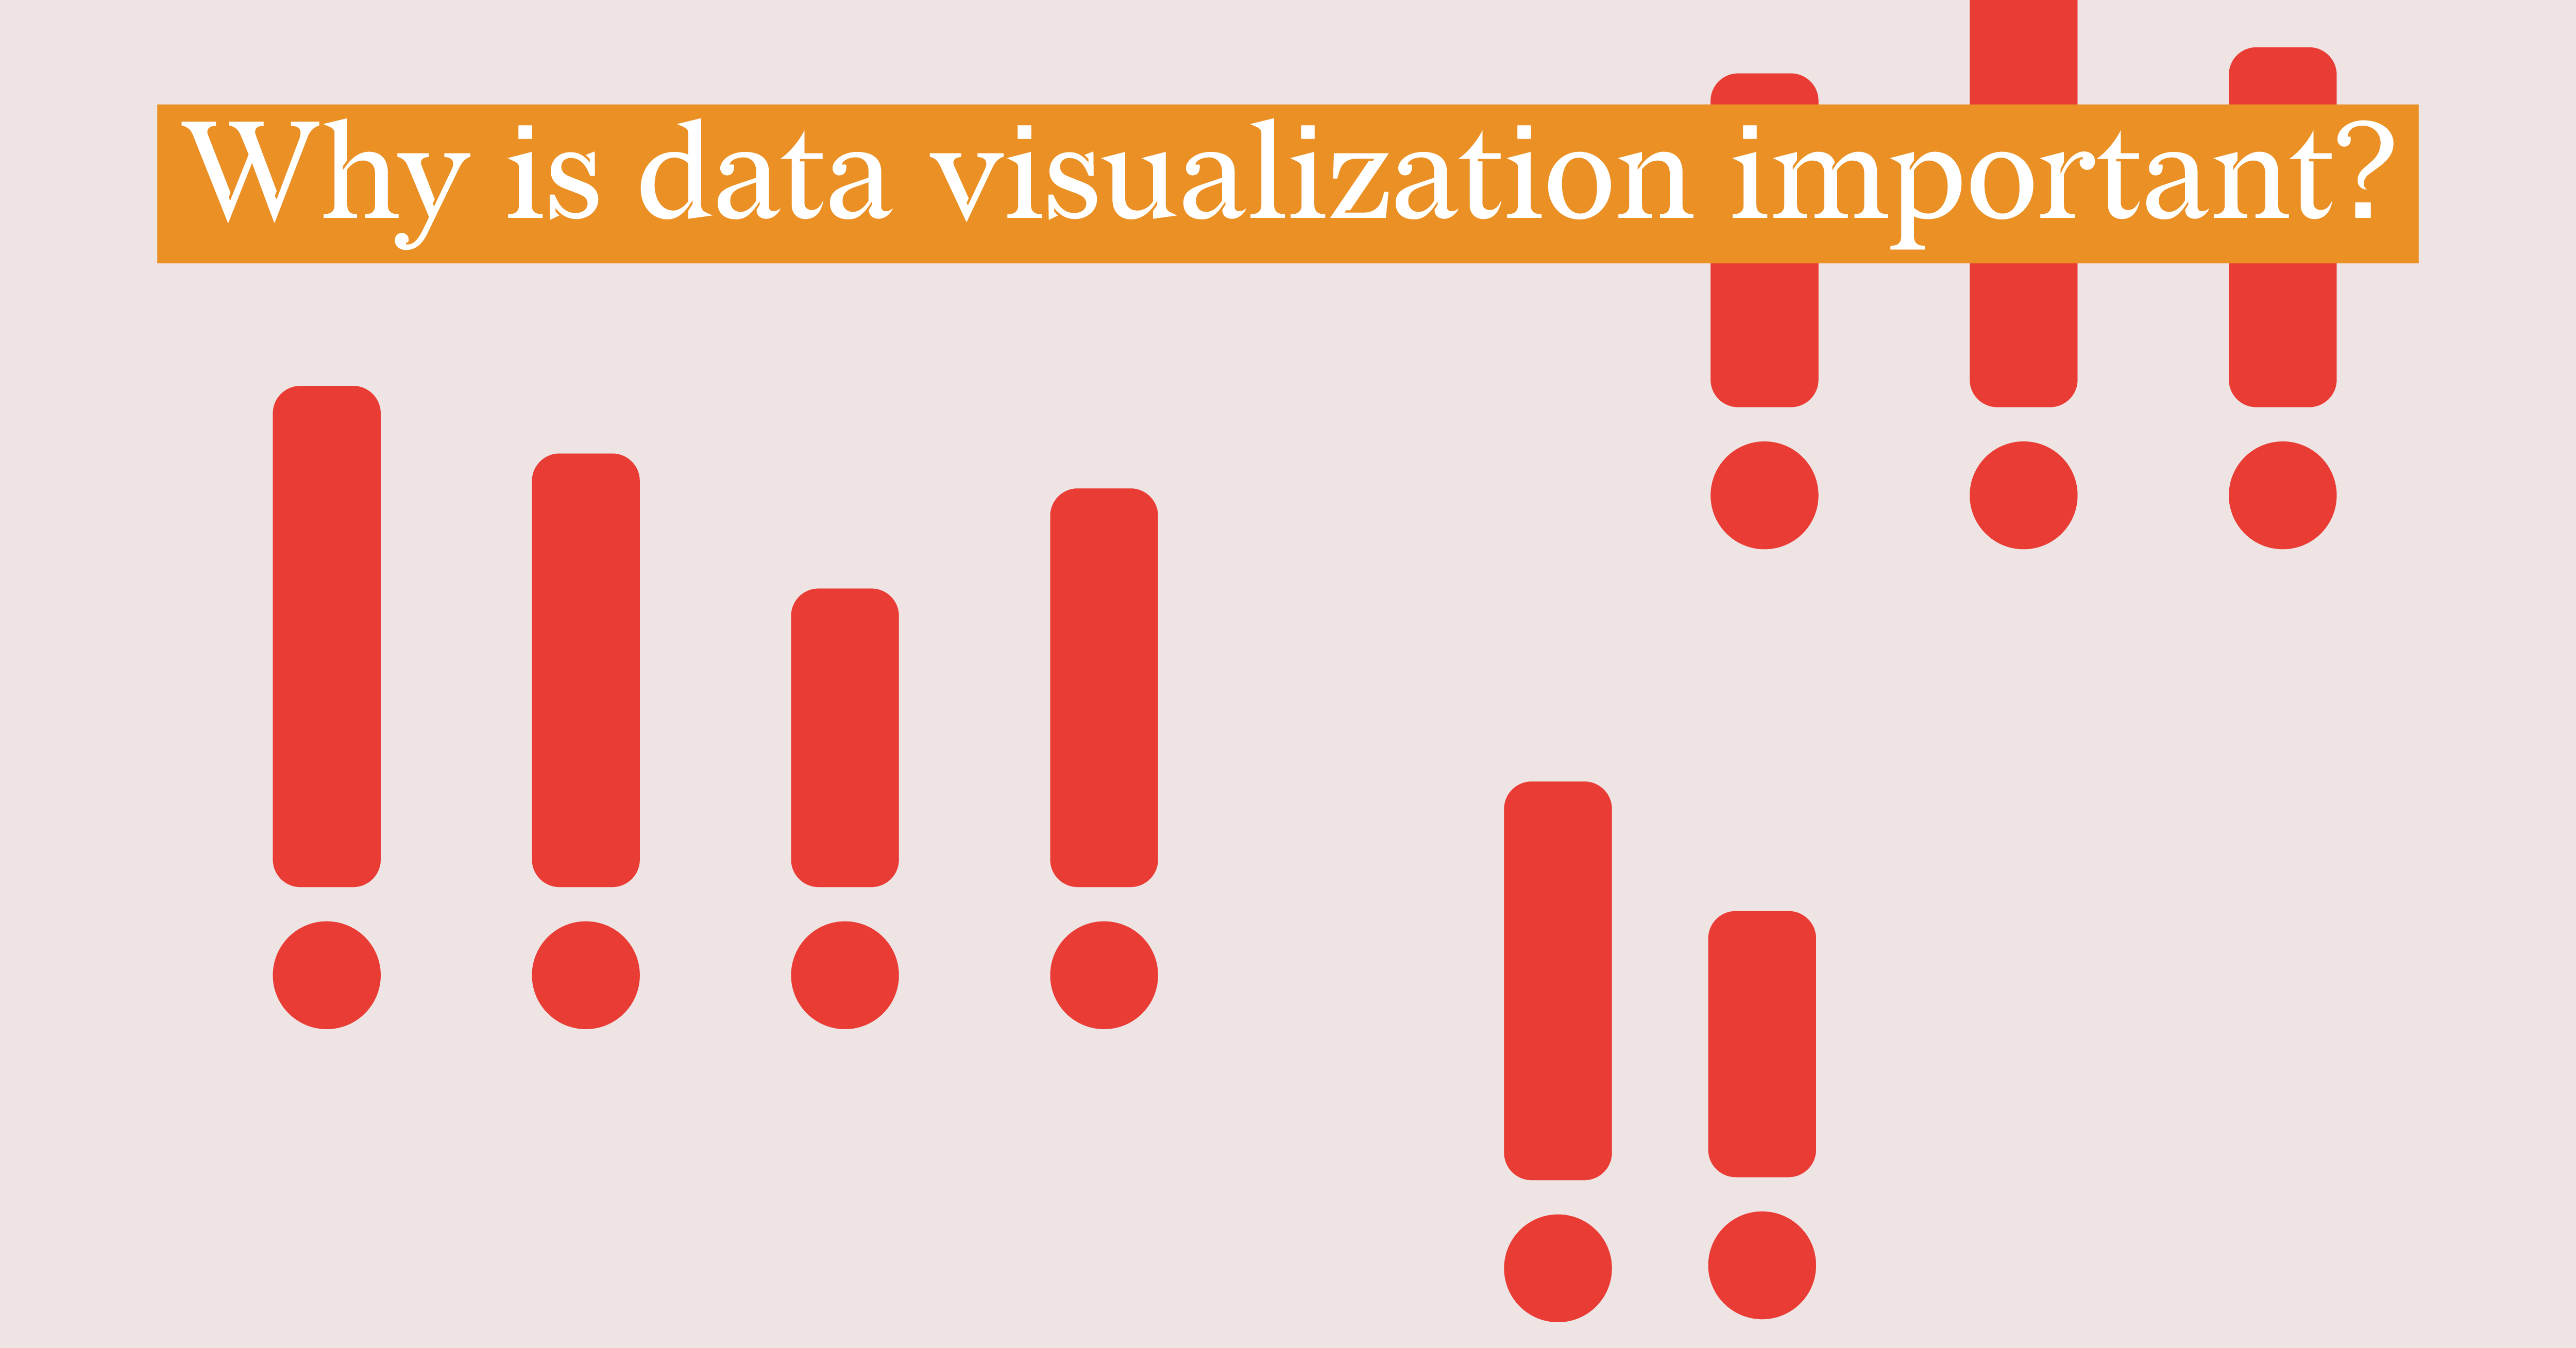 datylon-blog-Why-is-data-visualization-important-featured-image-1